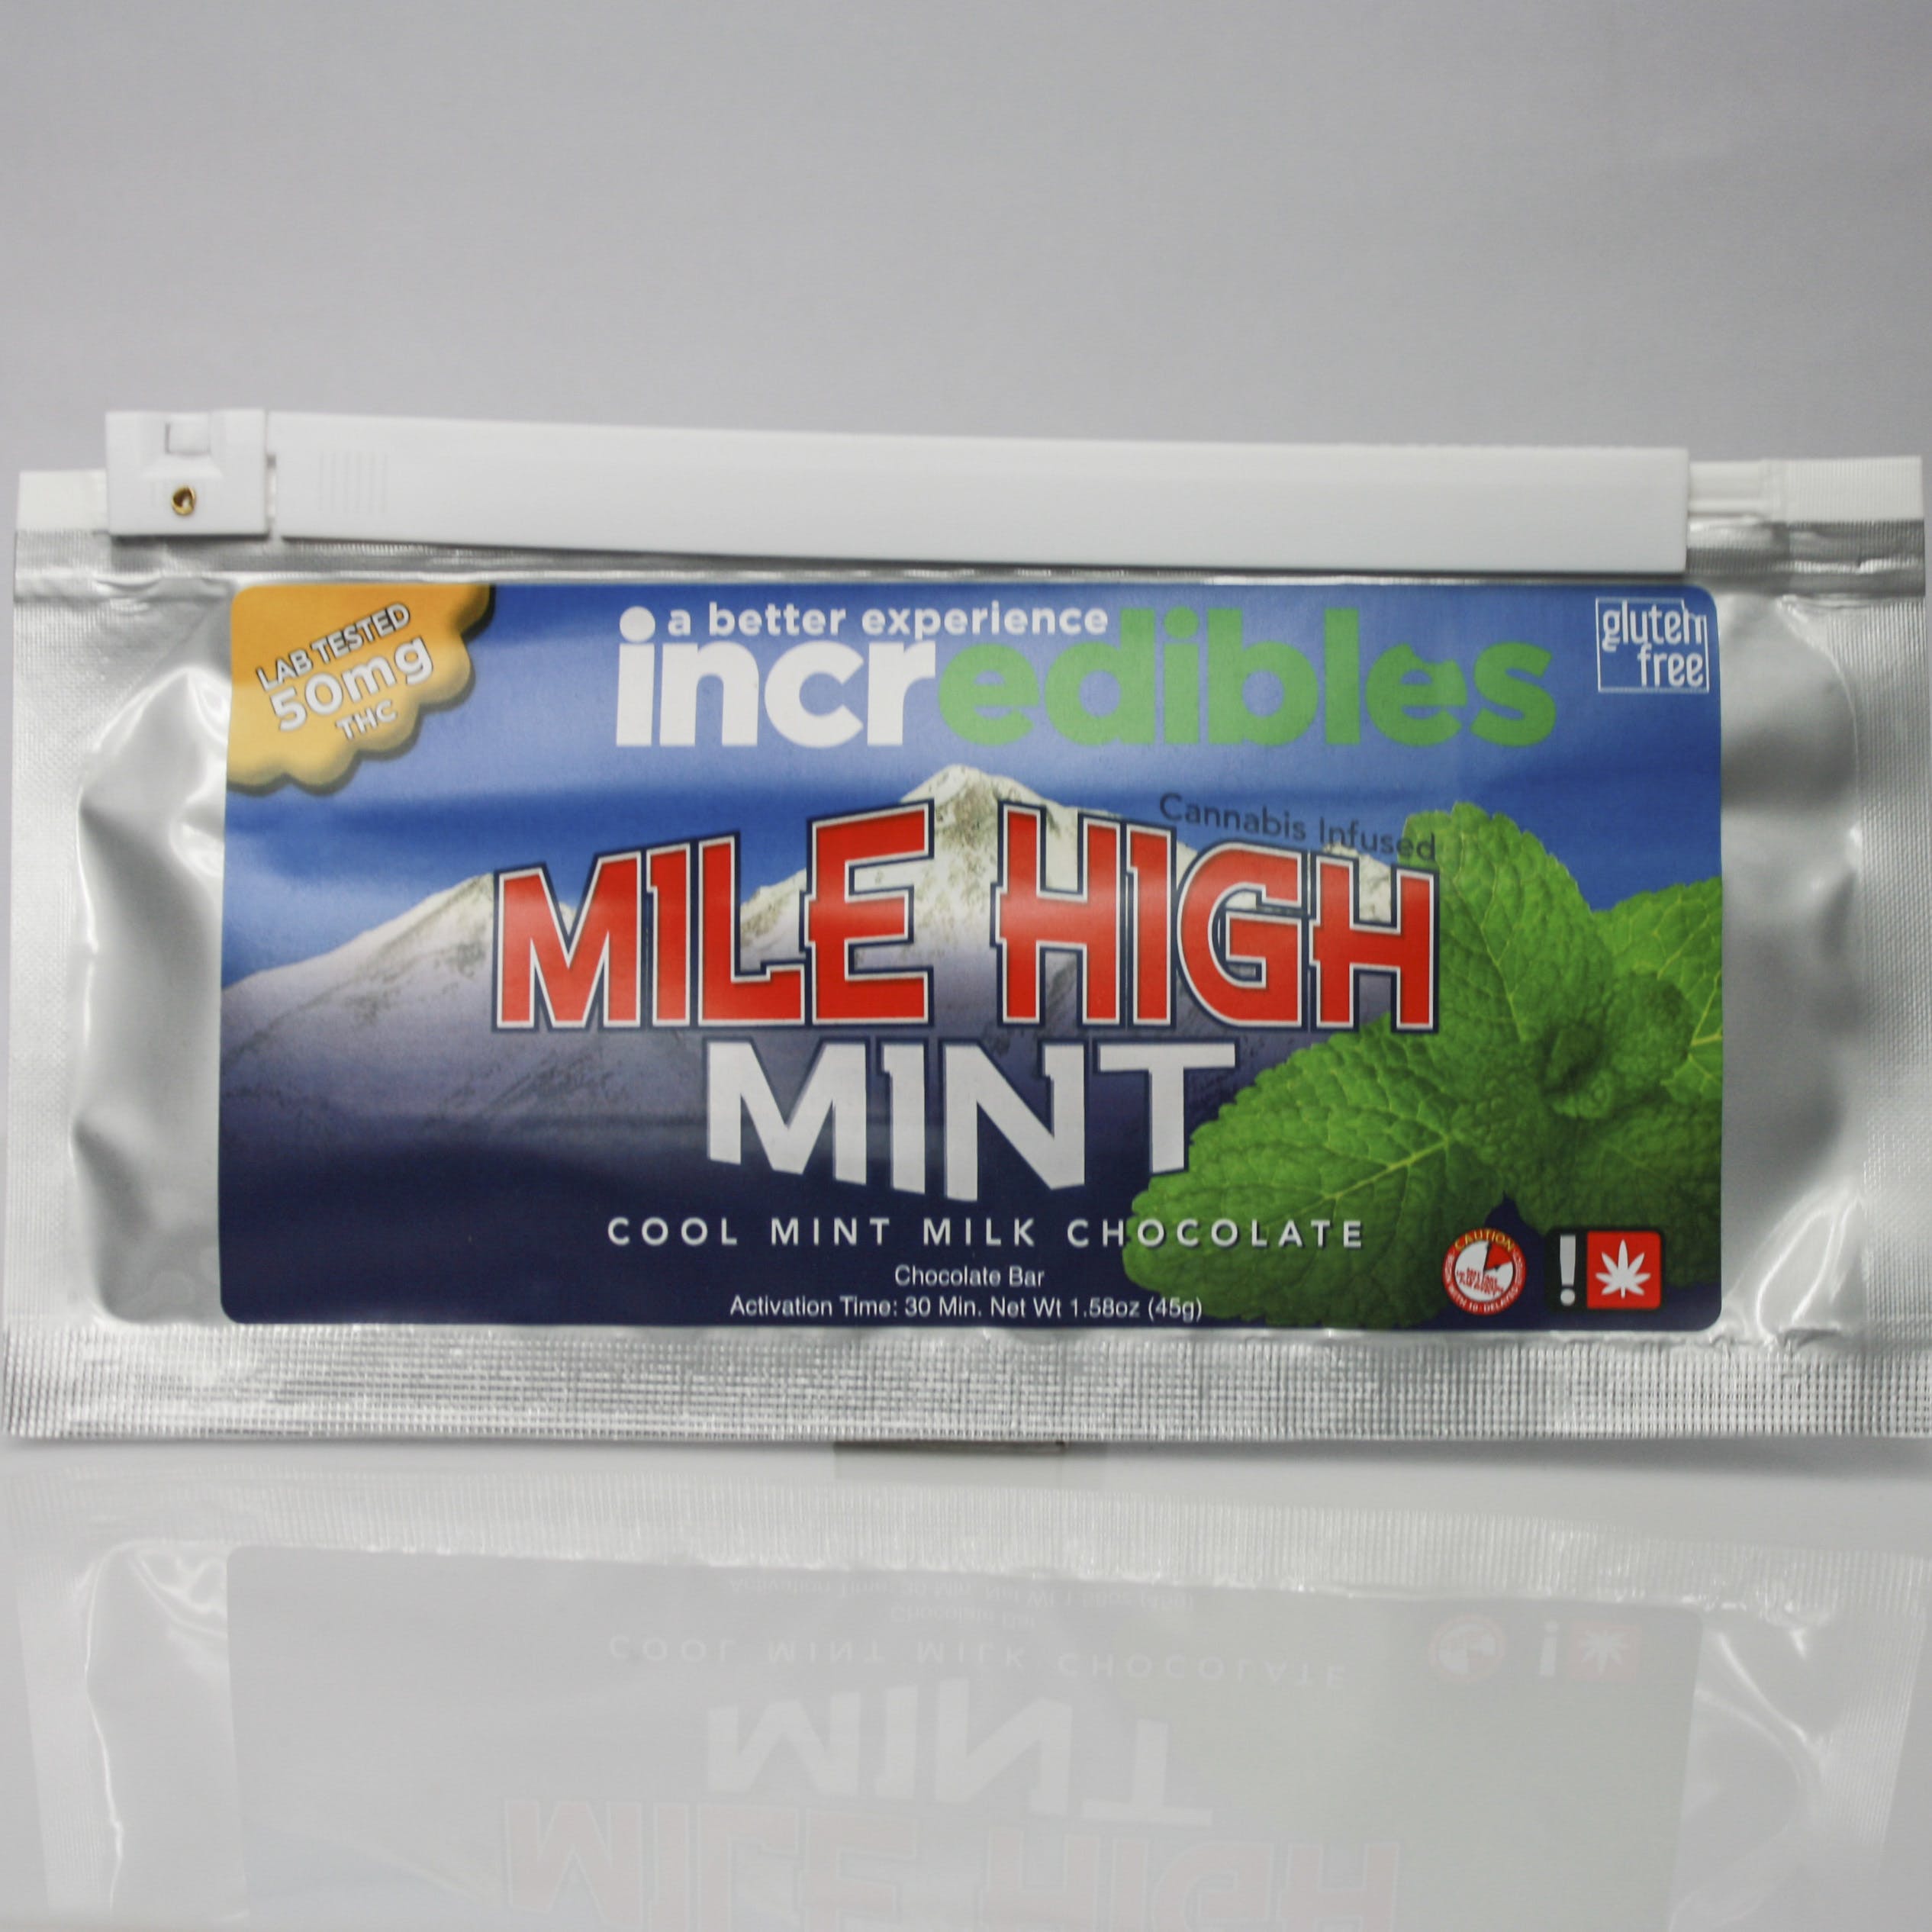 edible-mile-high-mint-incredibles